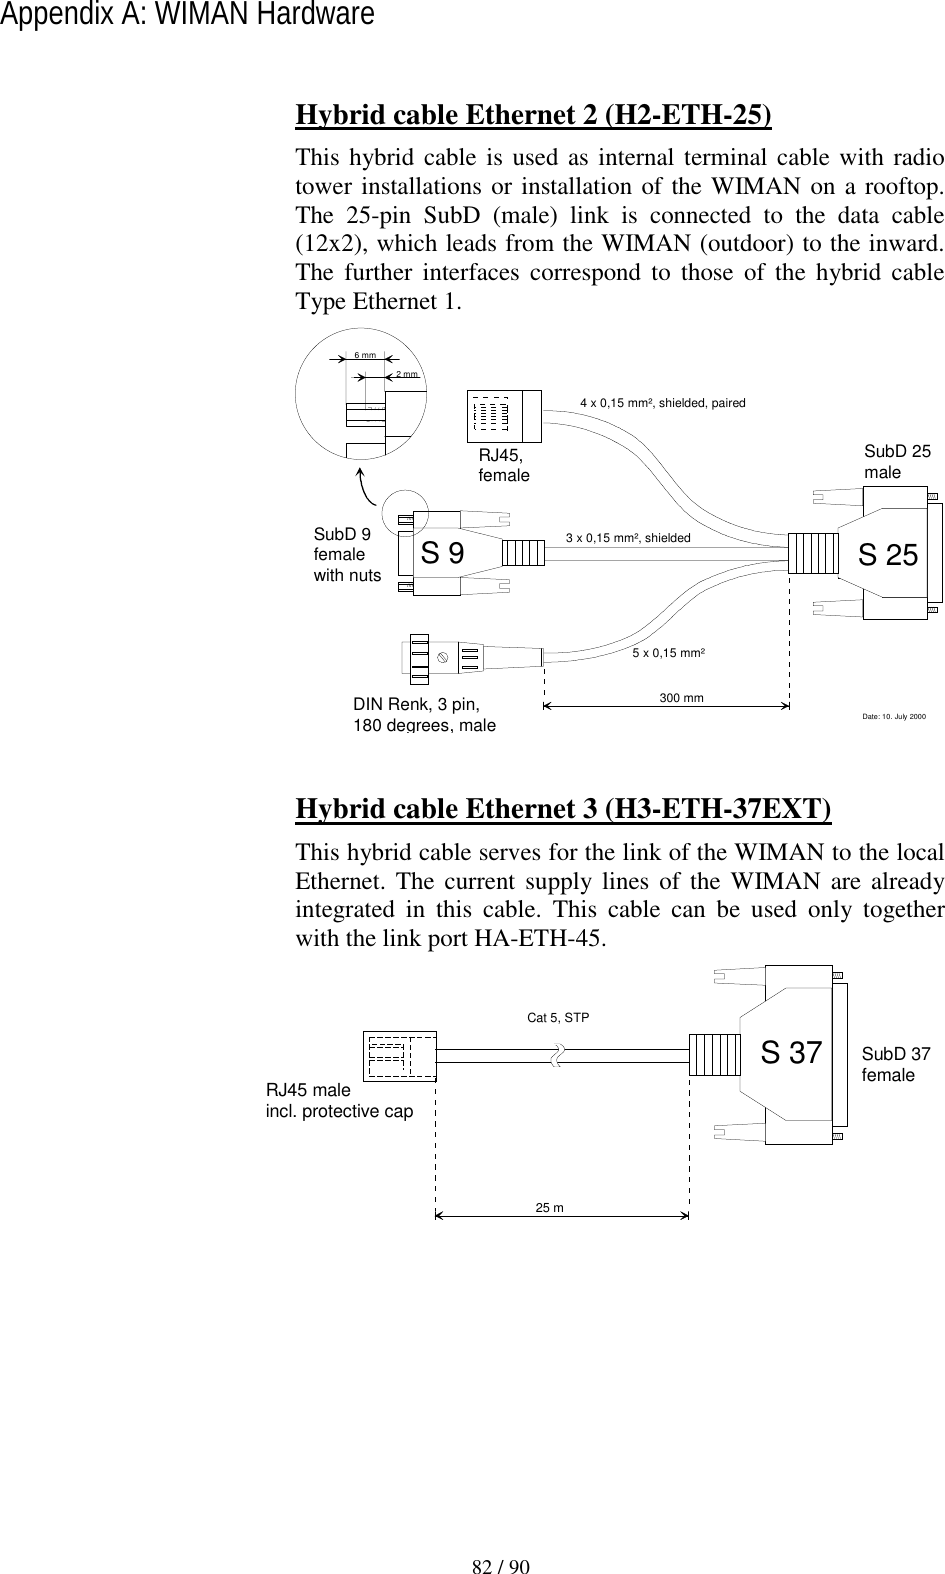   82 / 90 Appendix A: WIMAN Hardware  Hybrid cable Ethernet 2 (H2-ETH-25) This hybrid cable is used as internal terminal cable with radio tower installations or installation of the WIMAN on a rooftop. The 25-pin SubD (male) link is connected to the data cable (12x2), which leads from the WIMAN (outdoor) to the inward. The further interfaces correspond to those of the hybrid cable Type Ethernet 1. SubD 25maleS 254 x 0,15 mm², shielded, paired5 x 0,15 mm²3 x 0,15 mm², shielded300 mmS 9SubD 9femalewith nutsRJ45,femaleDIN Renk, 3 pin,180 degrees, male2 mm6 mmDate: 10. July 2000   Hybrid cable Ethernet 3 (H3-ETH-37EXT) This hybrid cable serves for the link of the WIMAN to the local Ethernet. The current supply lines of the WIMAN are already integrated in this cable. This cable can be used only together with the link port HA-ETH-45. S 37 SubD 37female25 mRJ45 maleincl. protective capCat 5, STP   